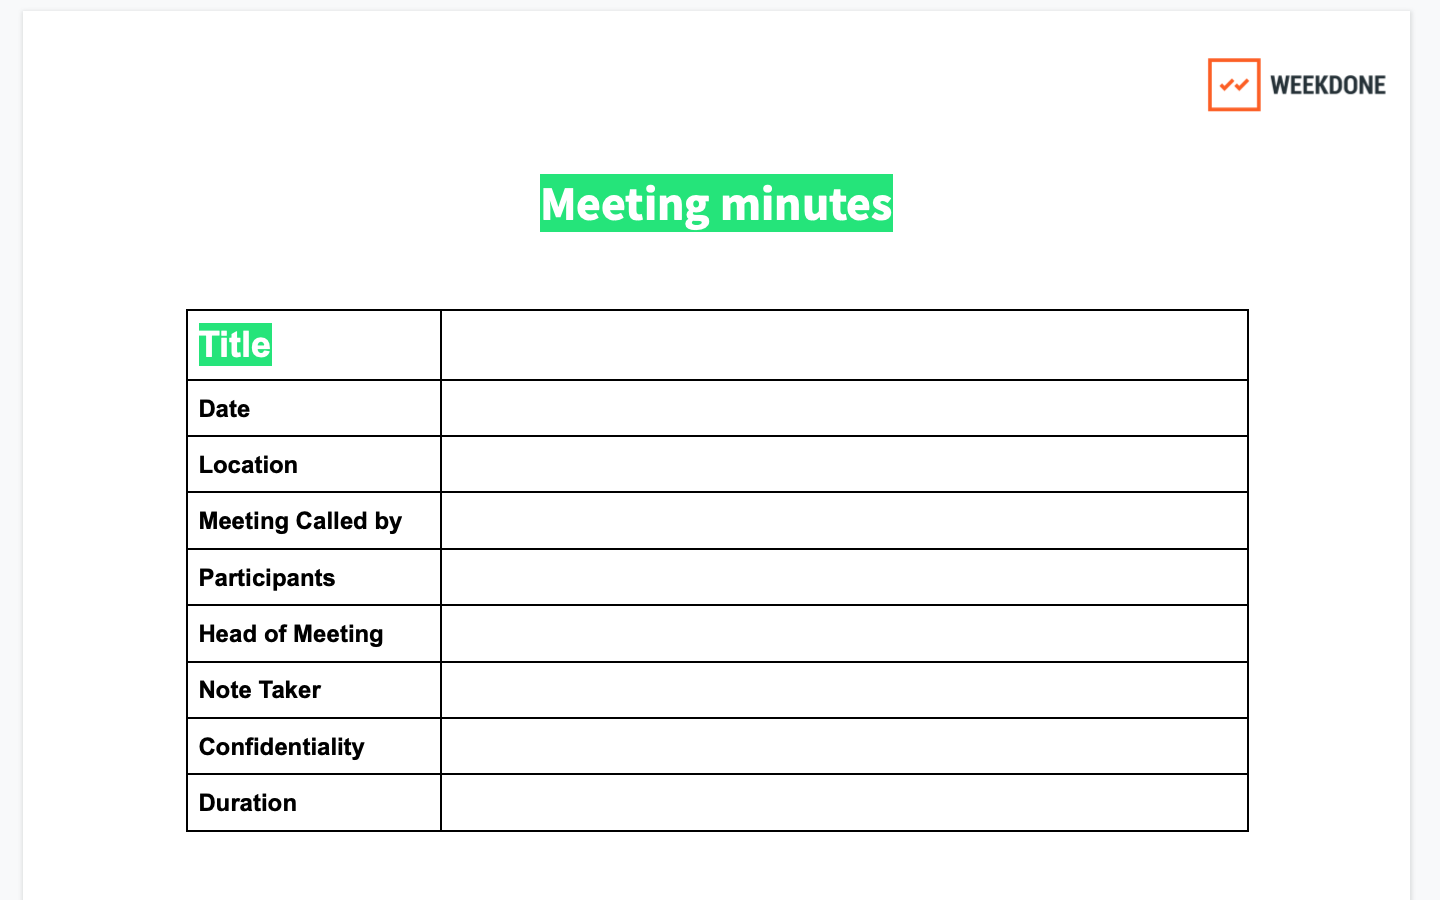 Meeting minutes spreadsheet template – Weekdone With Regard To Meeting Note Taking Template